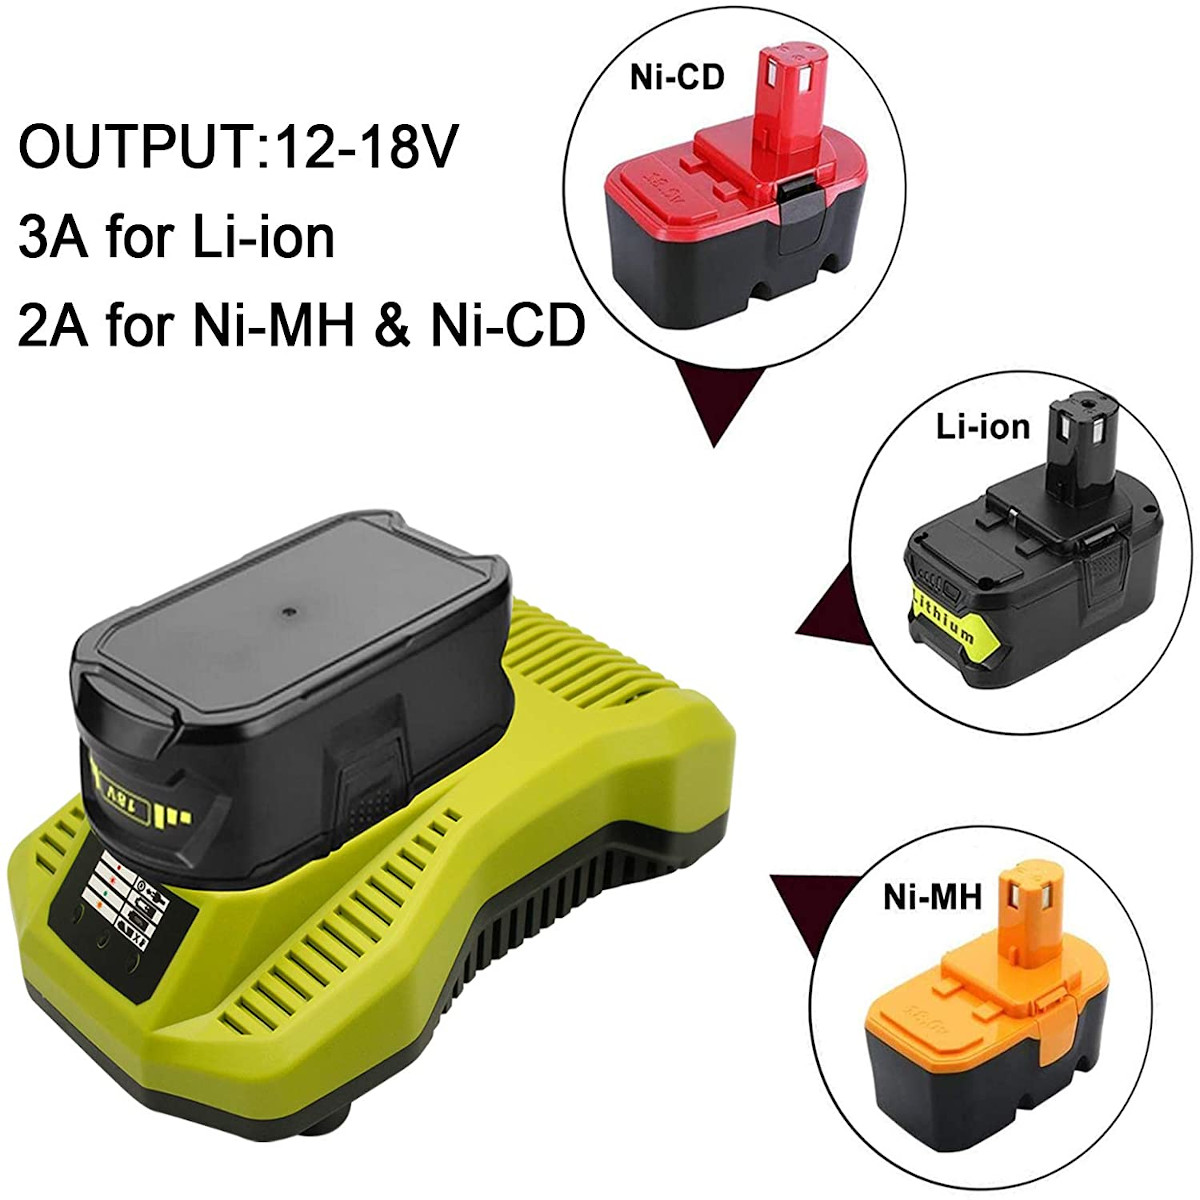 Ryobi-12V-18V-P117-Battery-Charger-Lithium-Battery-Nickel-Charge-Replacement-for-Ryobi-One-Plus-P100-1828672-3